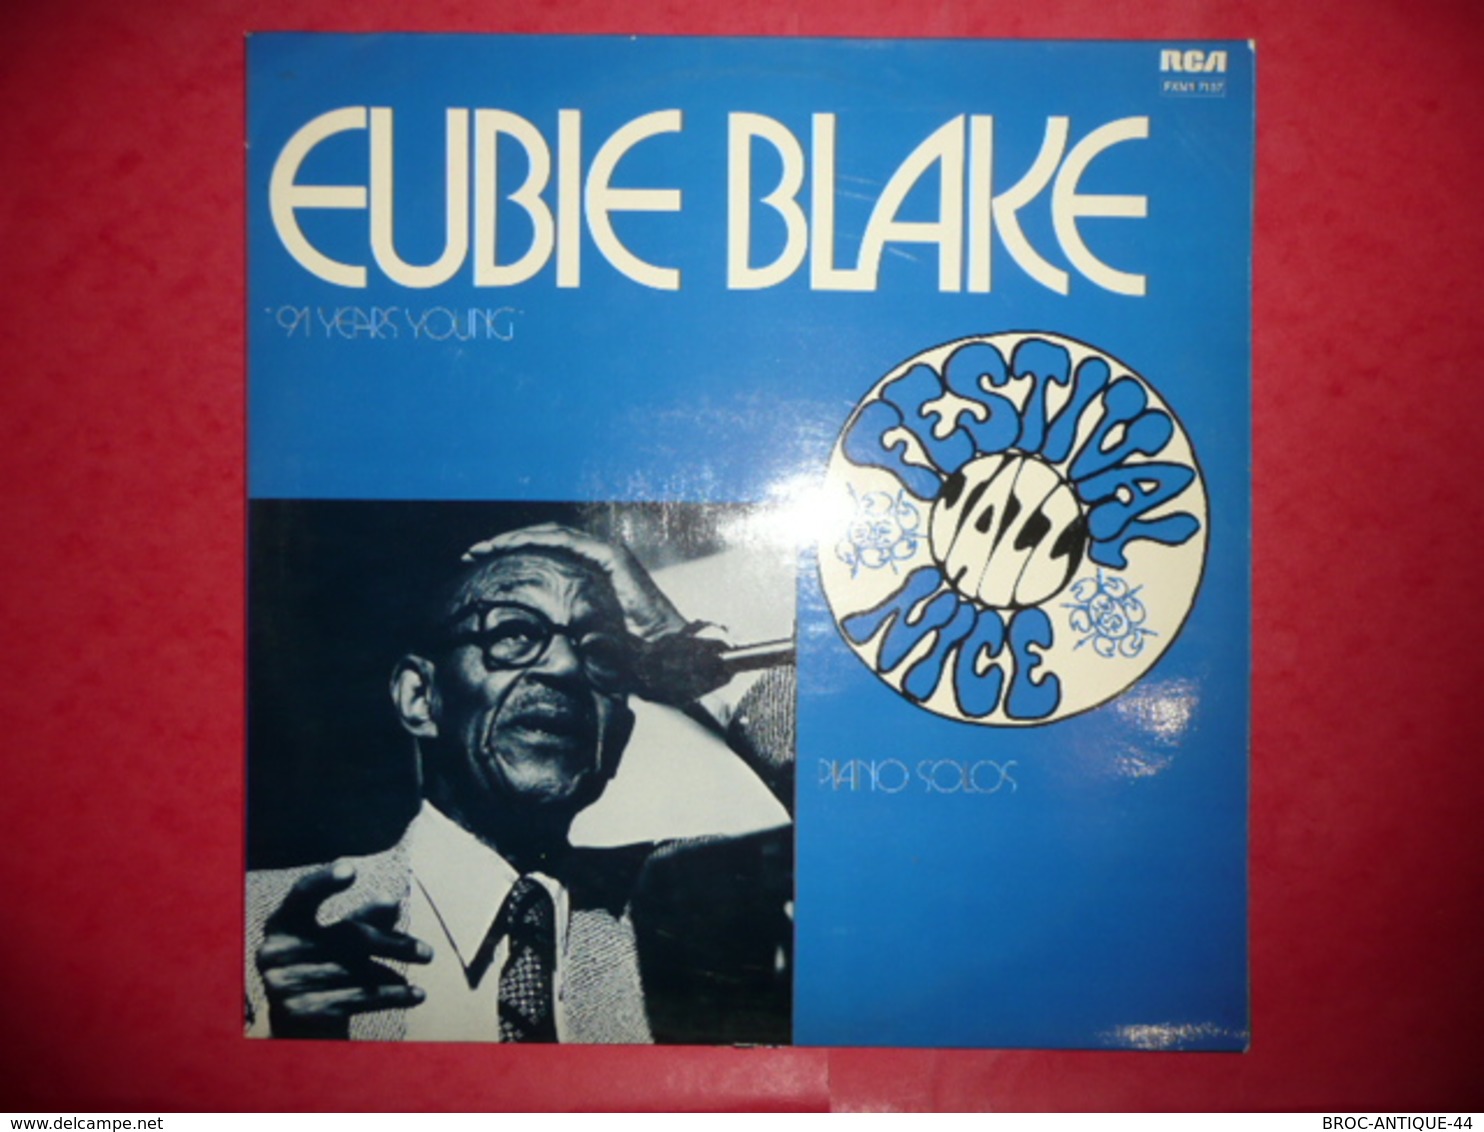 LP33 N°817 - EUBIE BLAKE - 91 YEARS YOUNG  - PIANO SOLOS - COMPILATION 9 TITRES JAZZ BLUES RAGTIME - Jazz